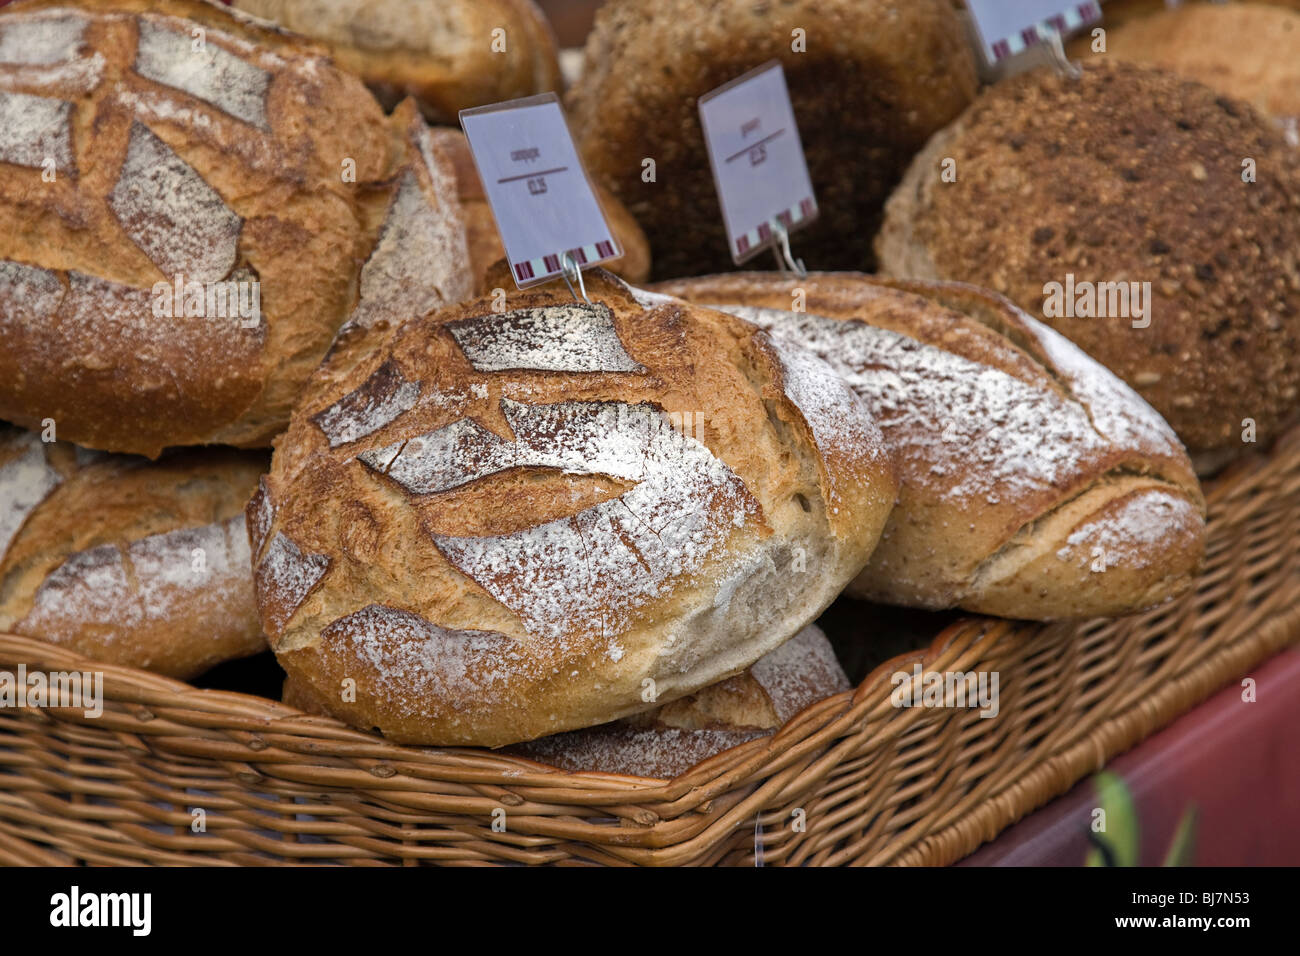 a basket of French bread on a market stall Stock Photo